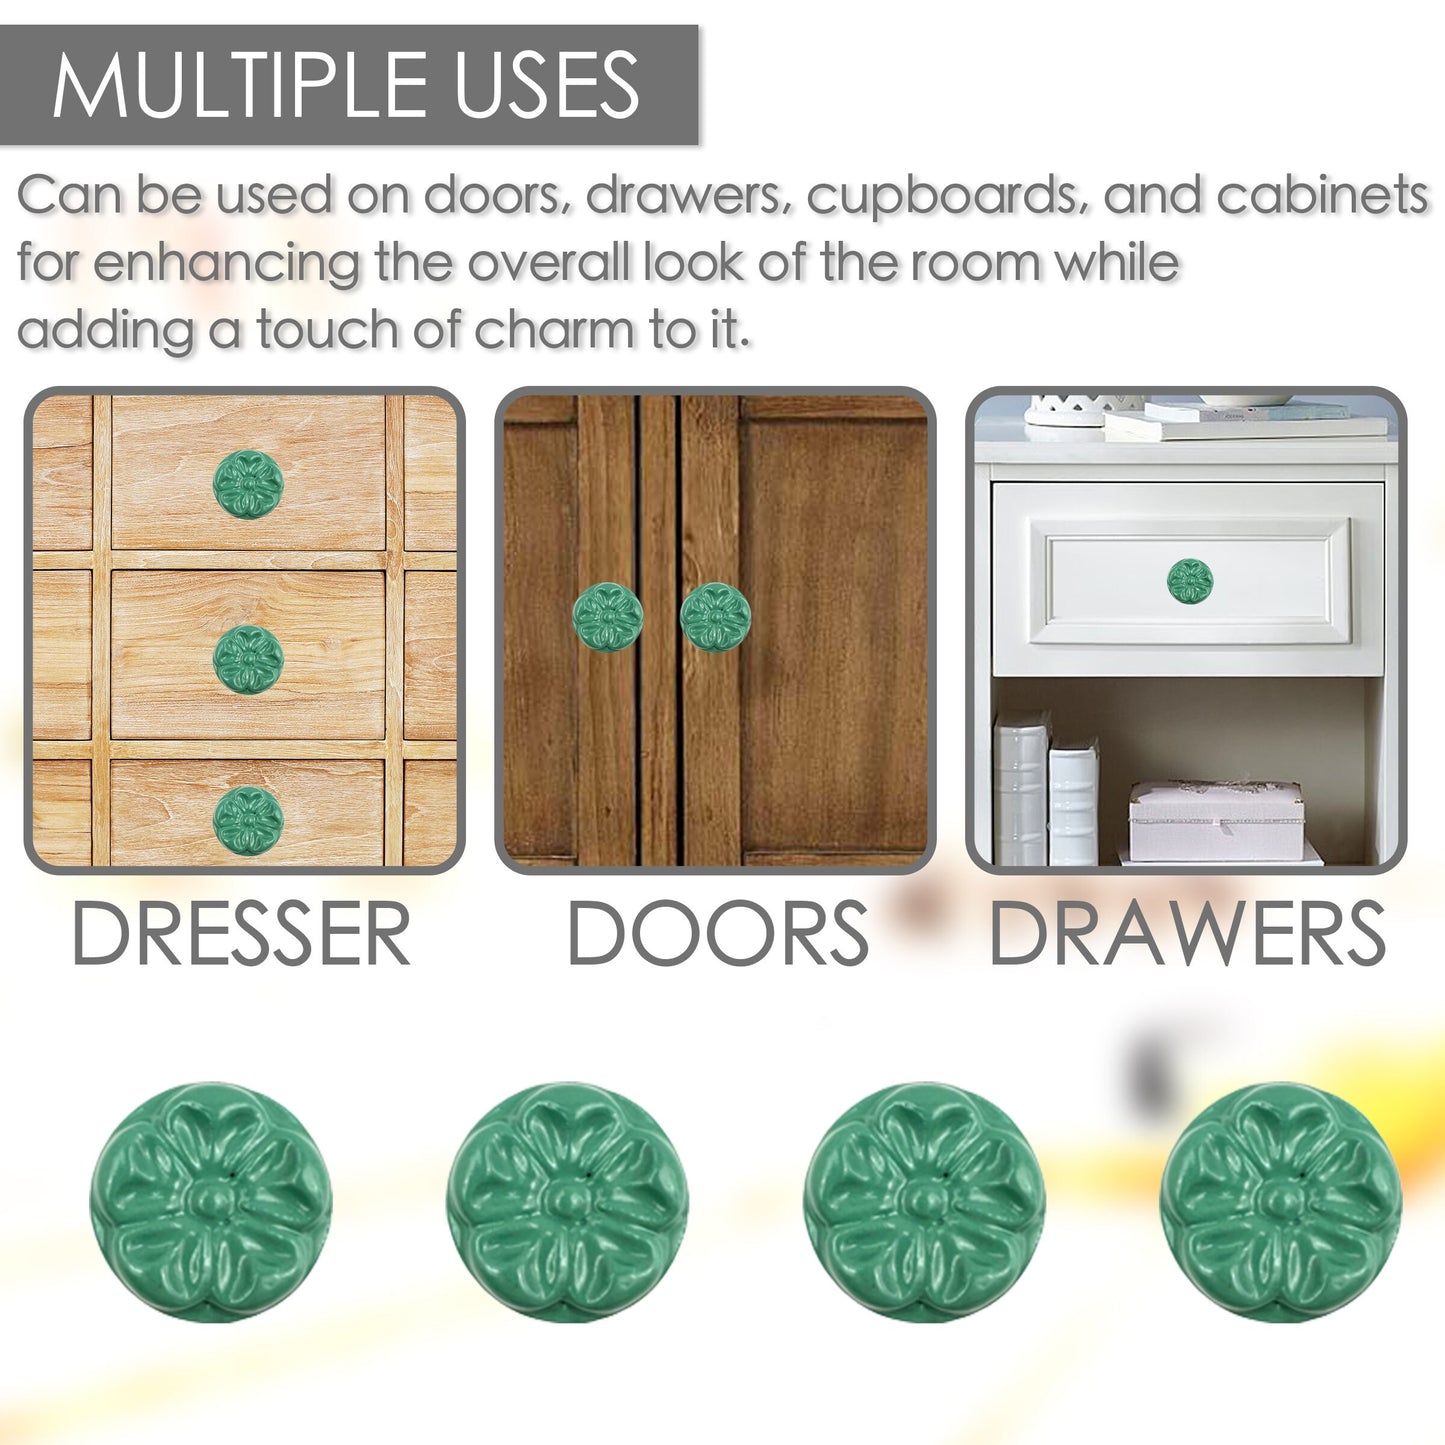 Ceramic Clover  Cabinet Knobs 6 Pack Knobs for Cabinets and Drawers, Closet Door Knobs, Drawer Pulls and Knobs with Mounting Screws